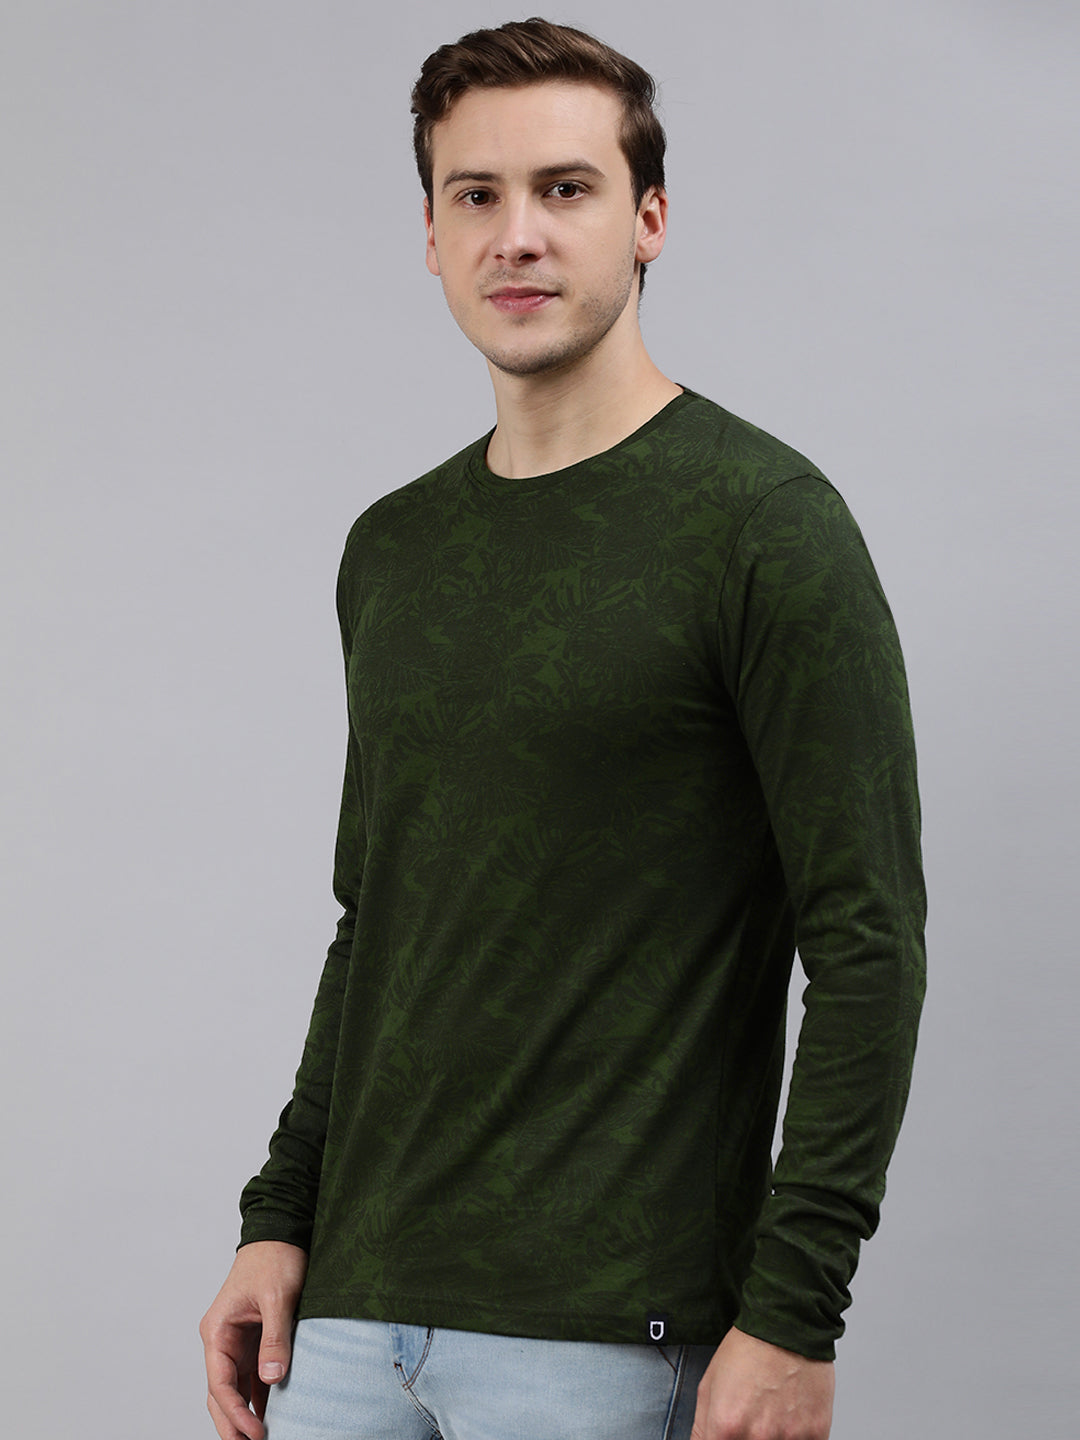 Men's Olive Green Printed Full Sleeve Slim Fit Cotton T-Shirt